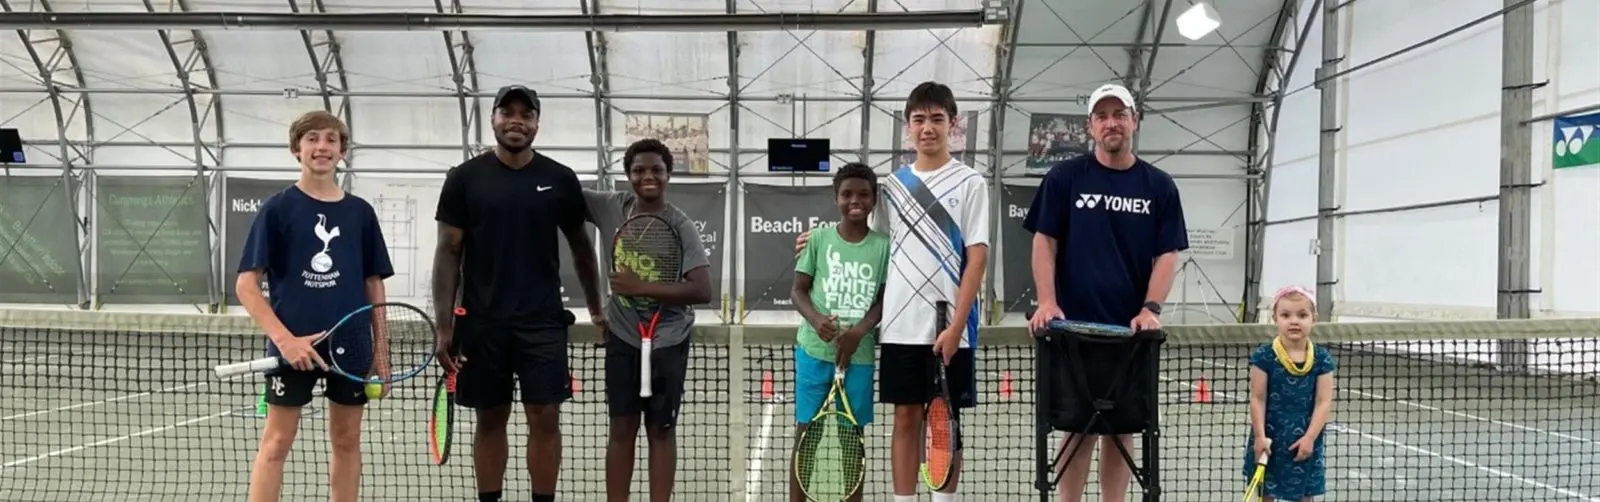 Group of 7 people of mixed ethnicities and ages holding tennis rackets standing in front of a tennis ball net.